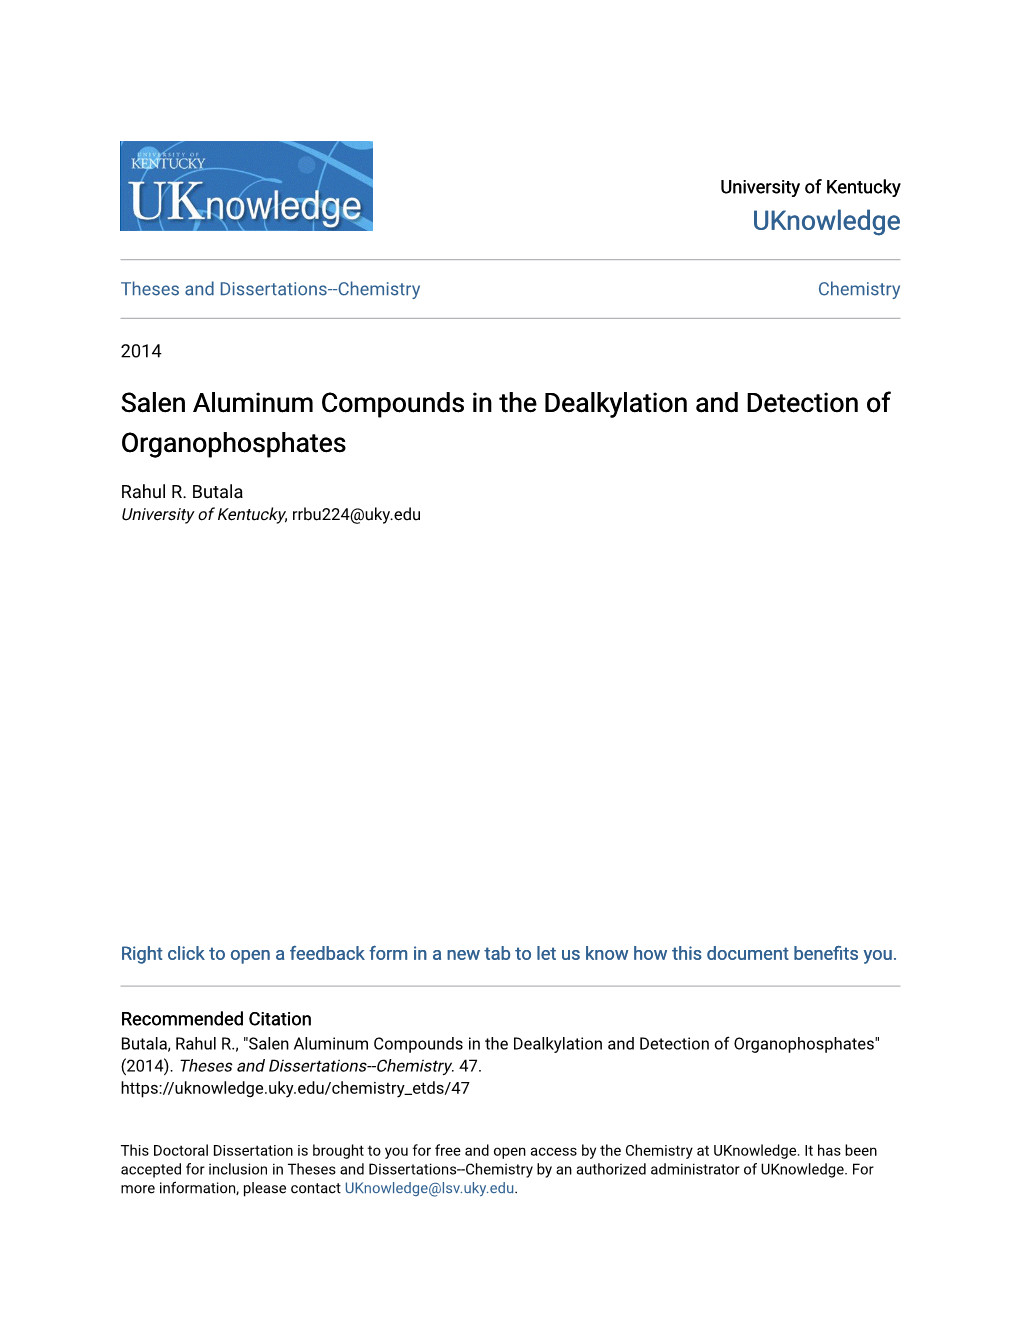 Salen Aluminum Compounds in the Dealkylation and Detection of Organophosphates